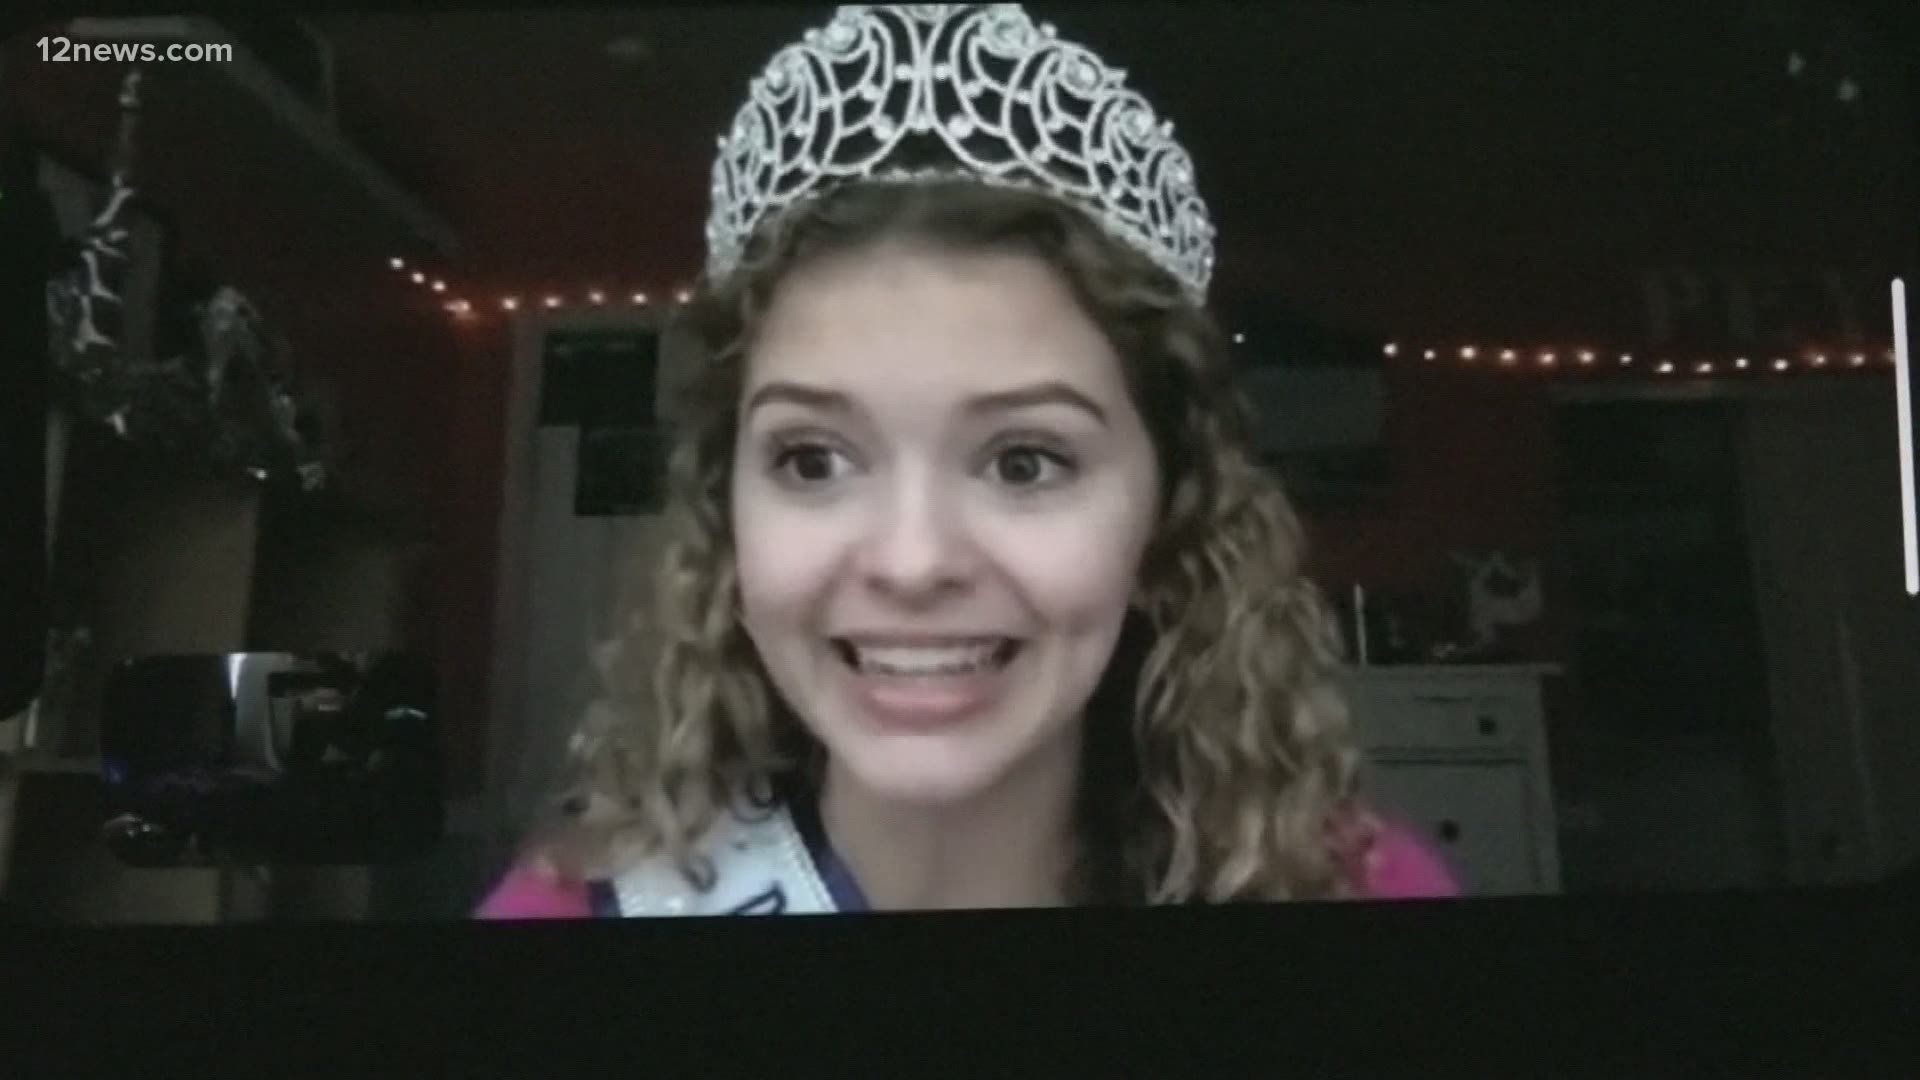 Wearing her brand-new crown, Peyton Stuewe reflects on her recent accomplishment of winning the National All-American Miss Jr. Teen title.